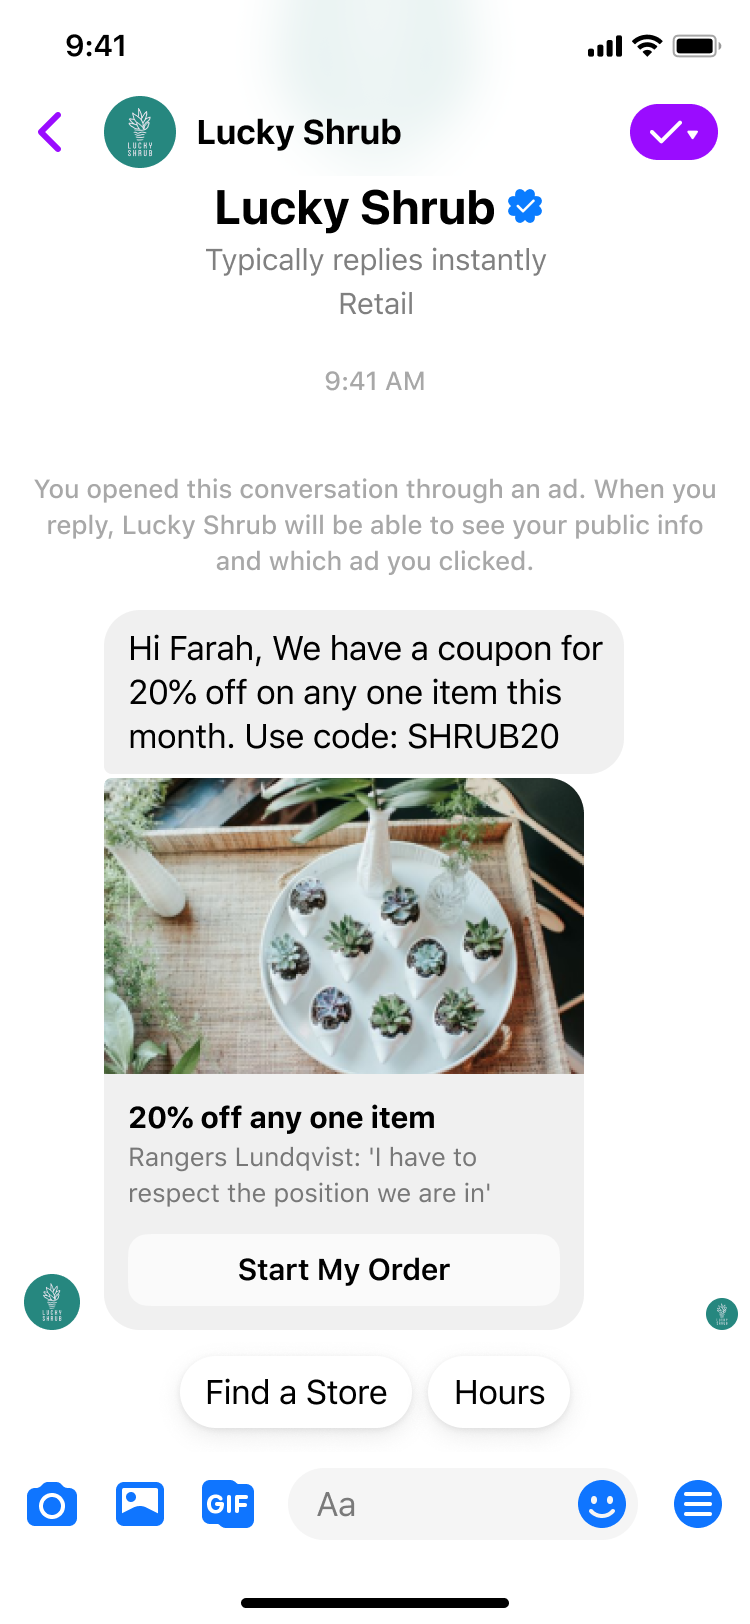 An image showing how the Facebook messenger bot helps customers with order placement